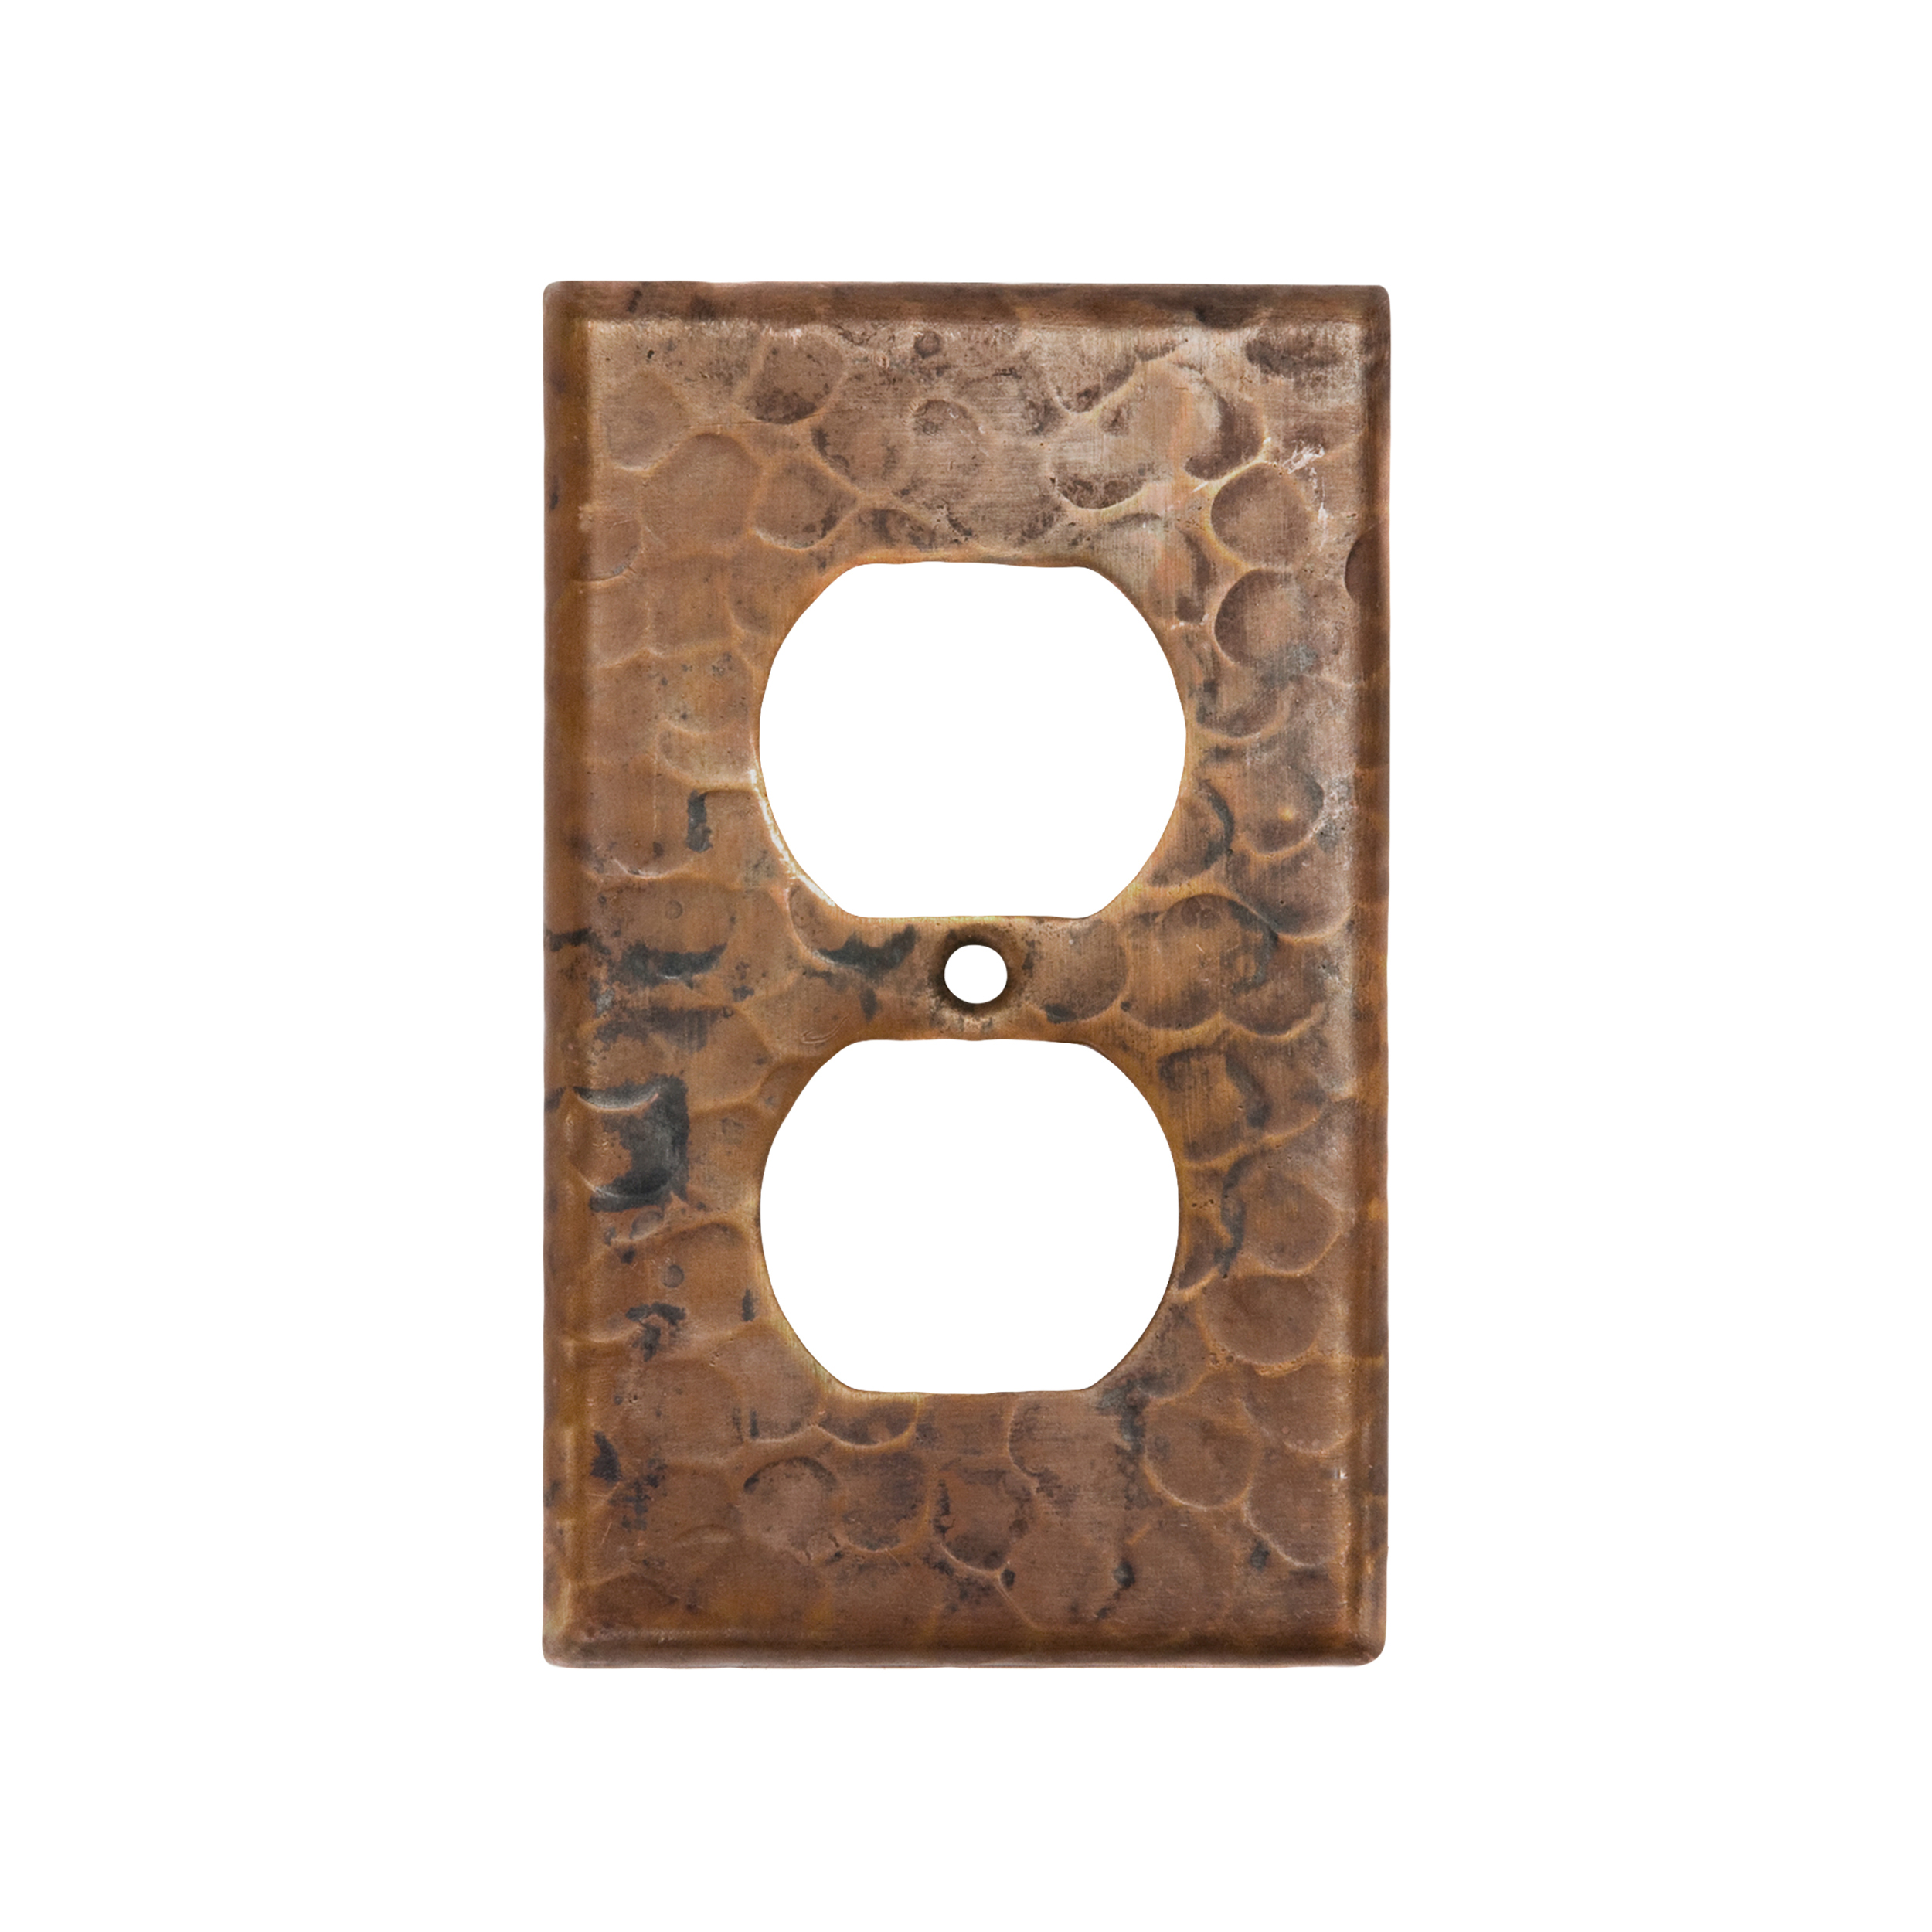 Single Duplex 2-hole Outlet Switchplate Cover